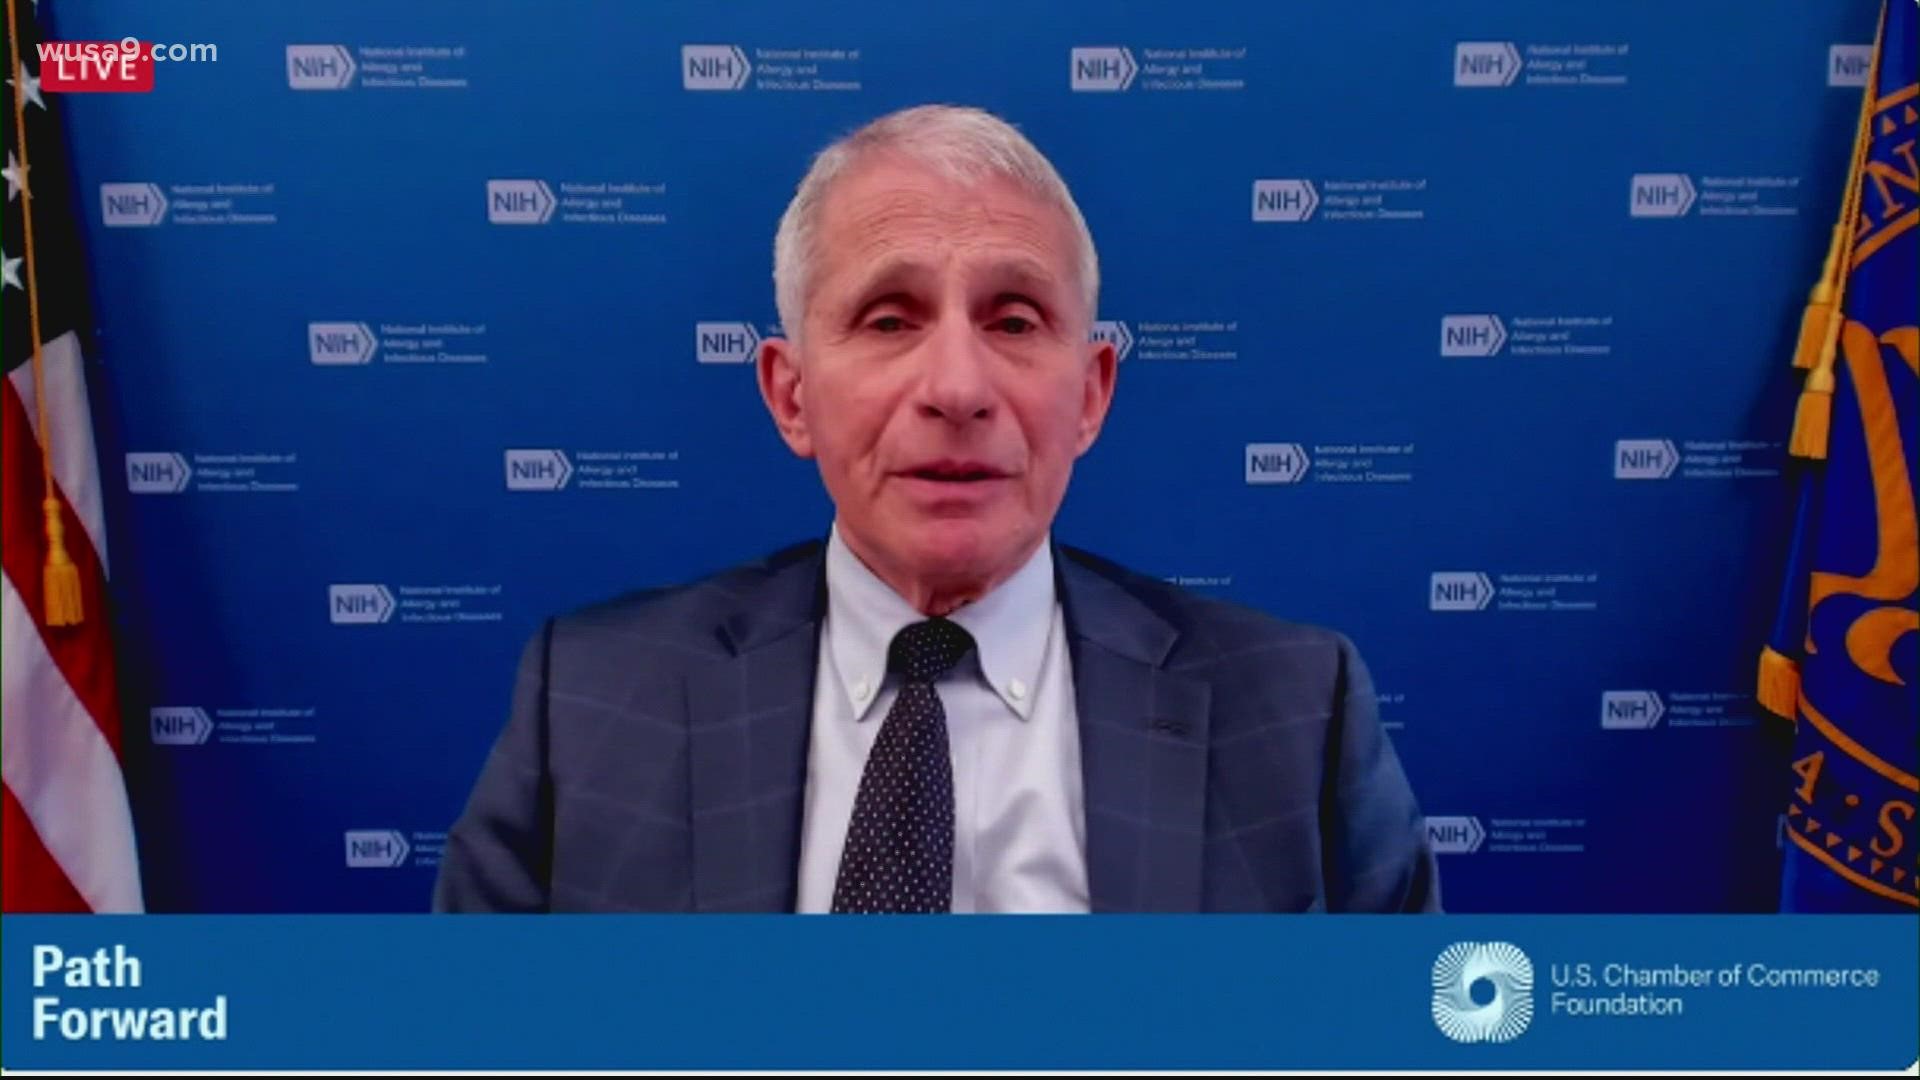 CDC data shows the omicron variant is more contagious than the delta variant, but its symptoms may be more mild. Dr. Fauci expects it to soon be the dominant strain.